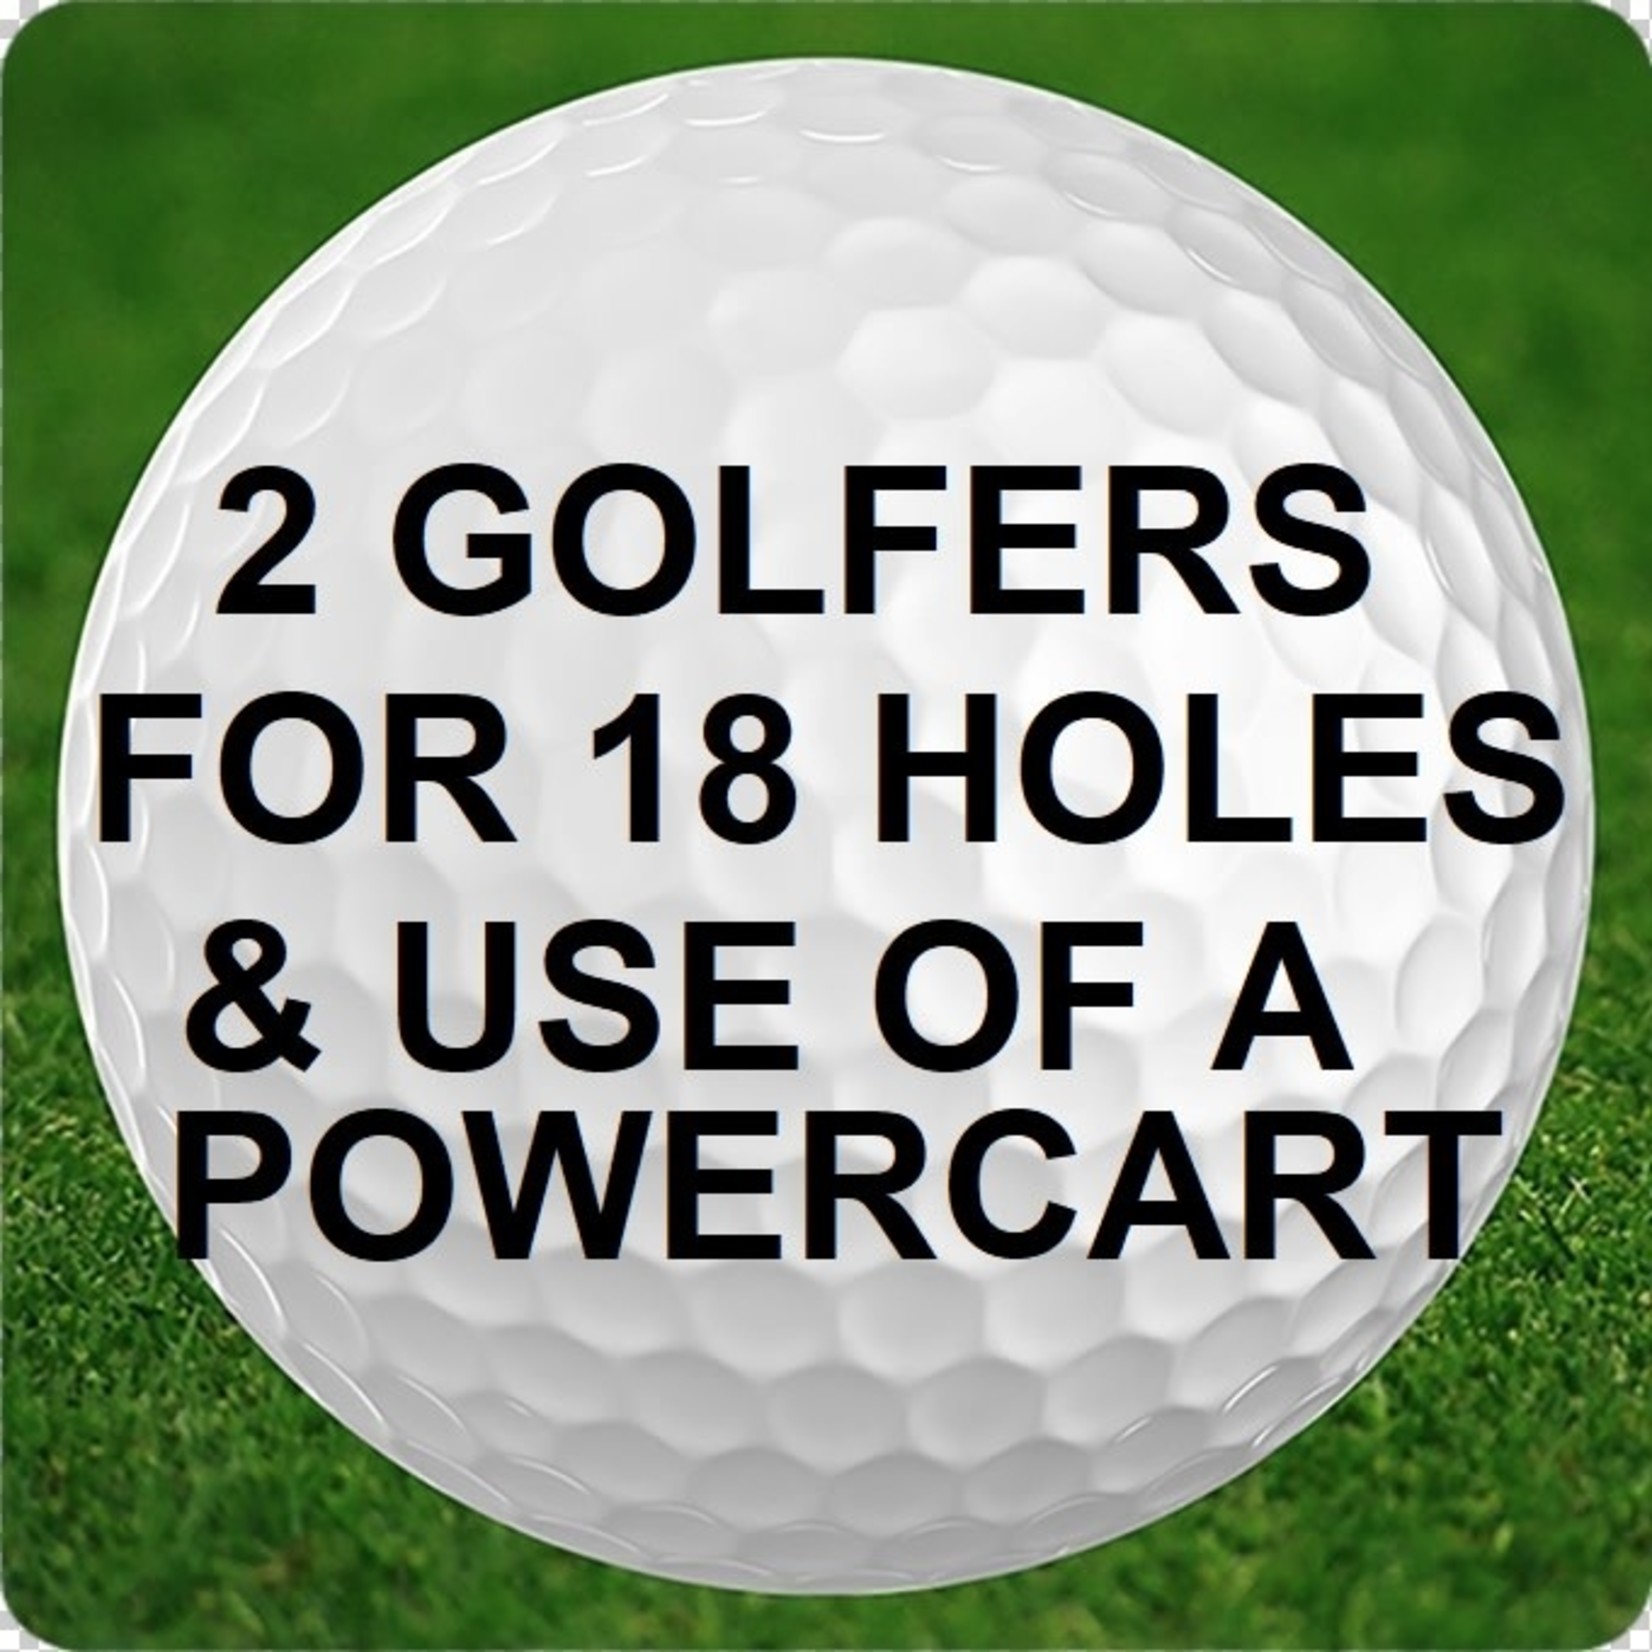 2 Golfers for 18 Holes with use of a Power Cart